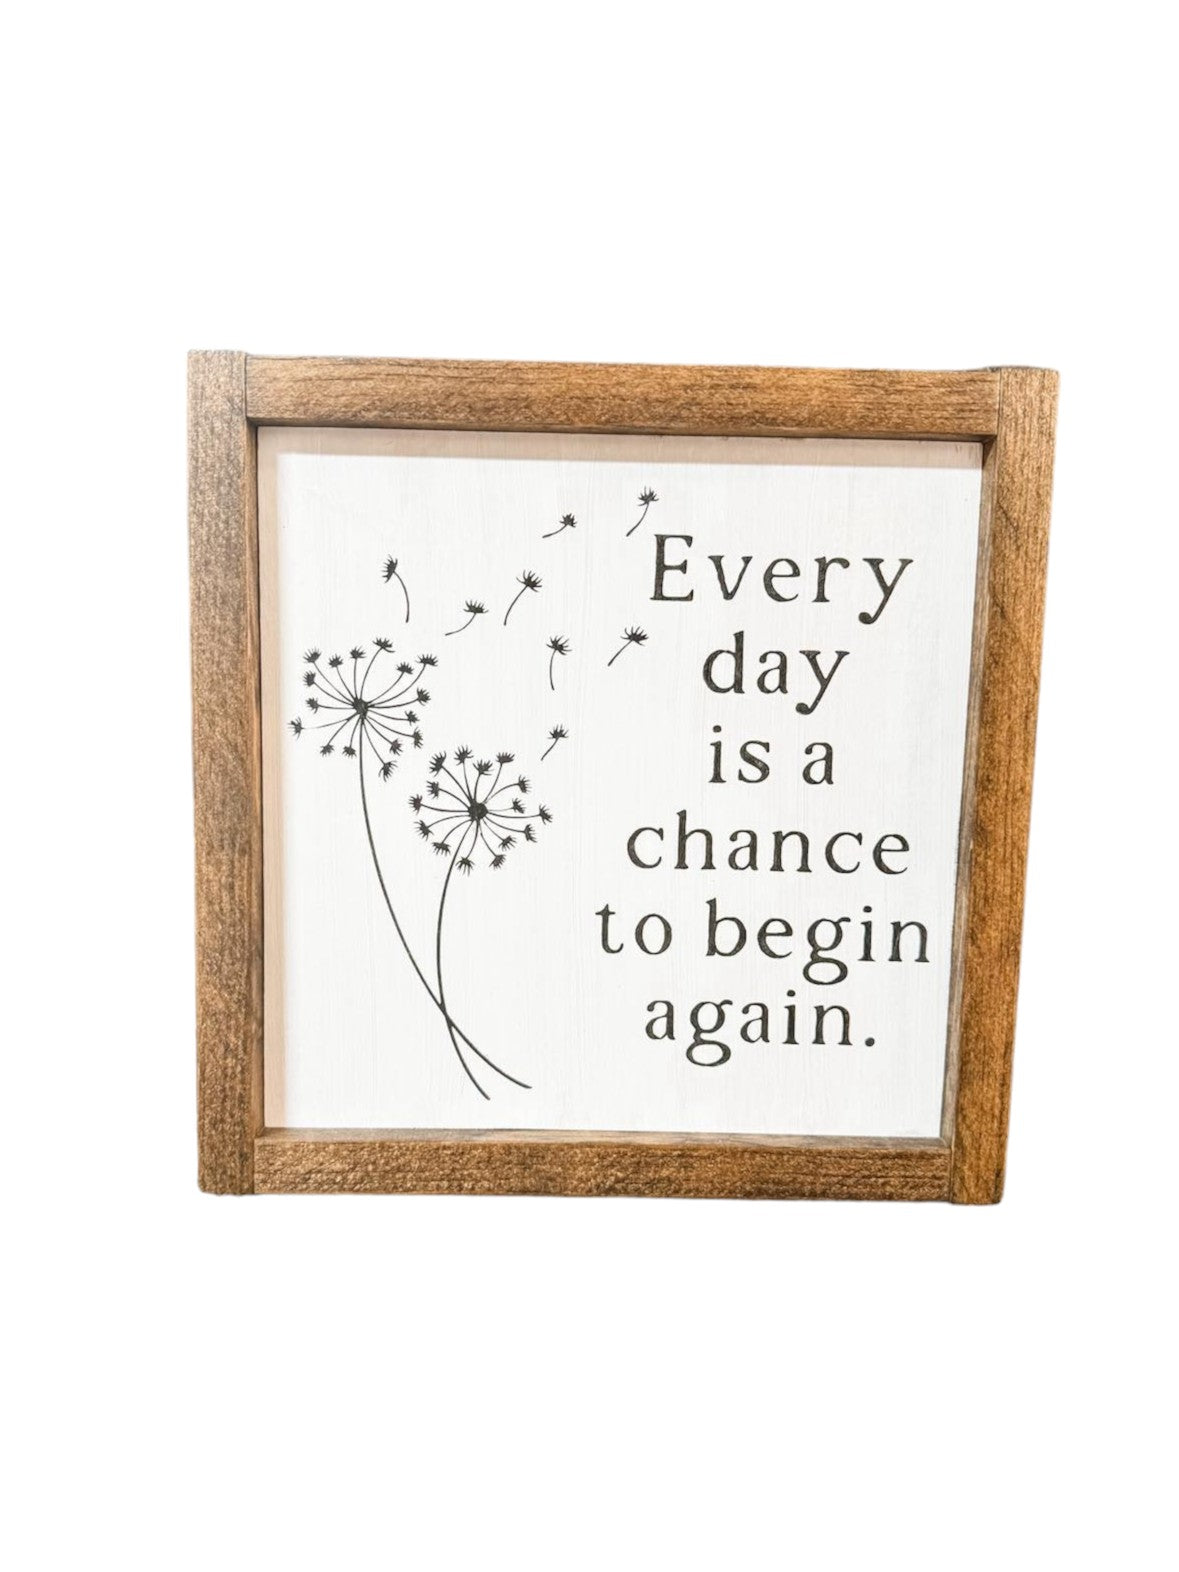 Dandelion art wood sign with inspirational quote for rustic farmhouse decor